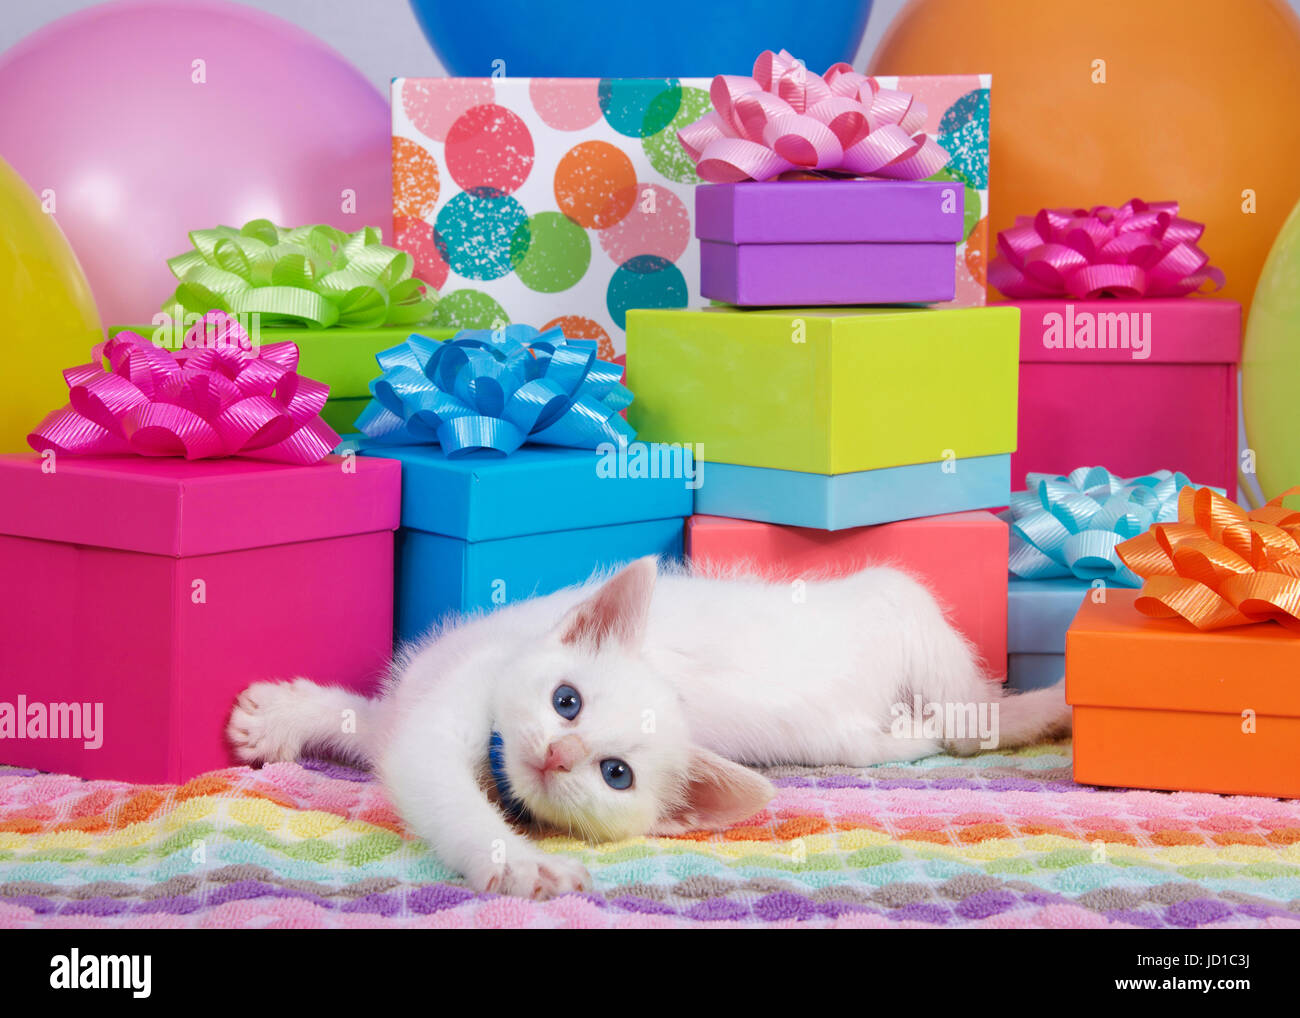 One fluffy white blue eyed kitten laying down playing in front of a pile of brightly colored birthday presents and balloons. Stock Photo